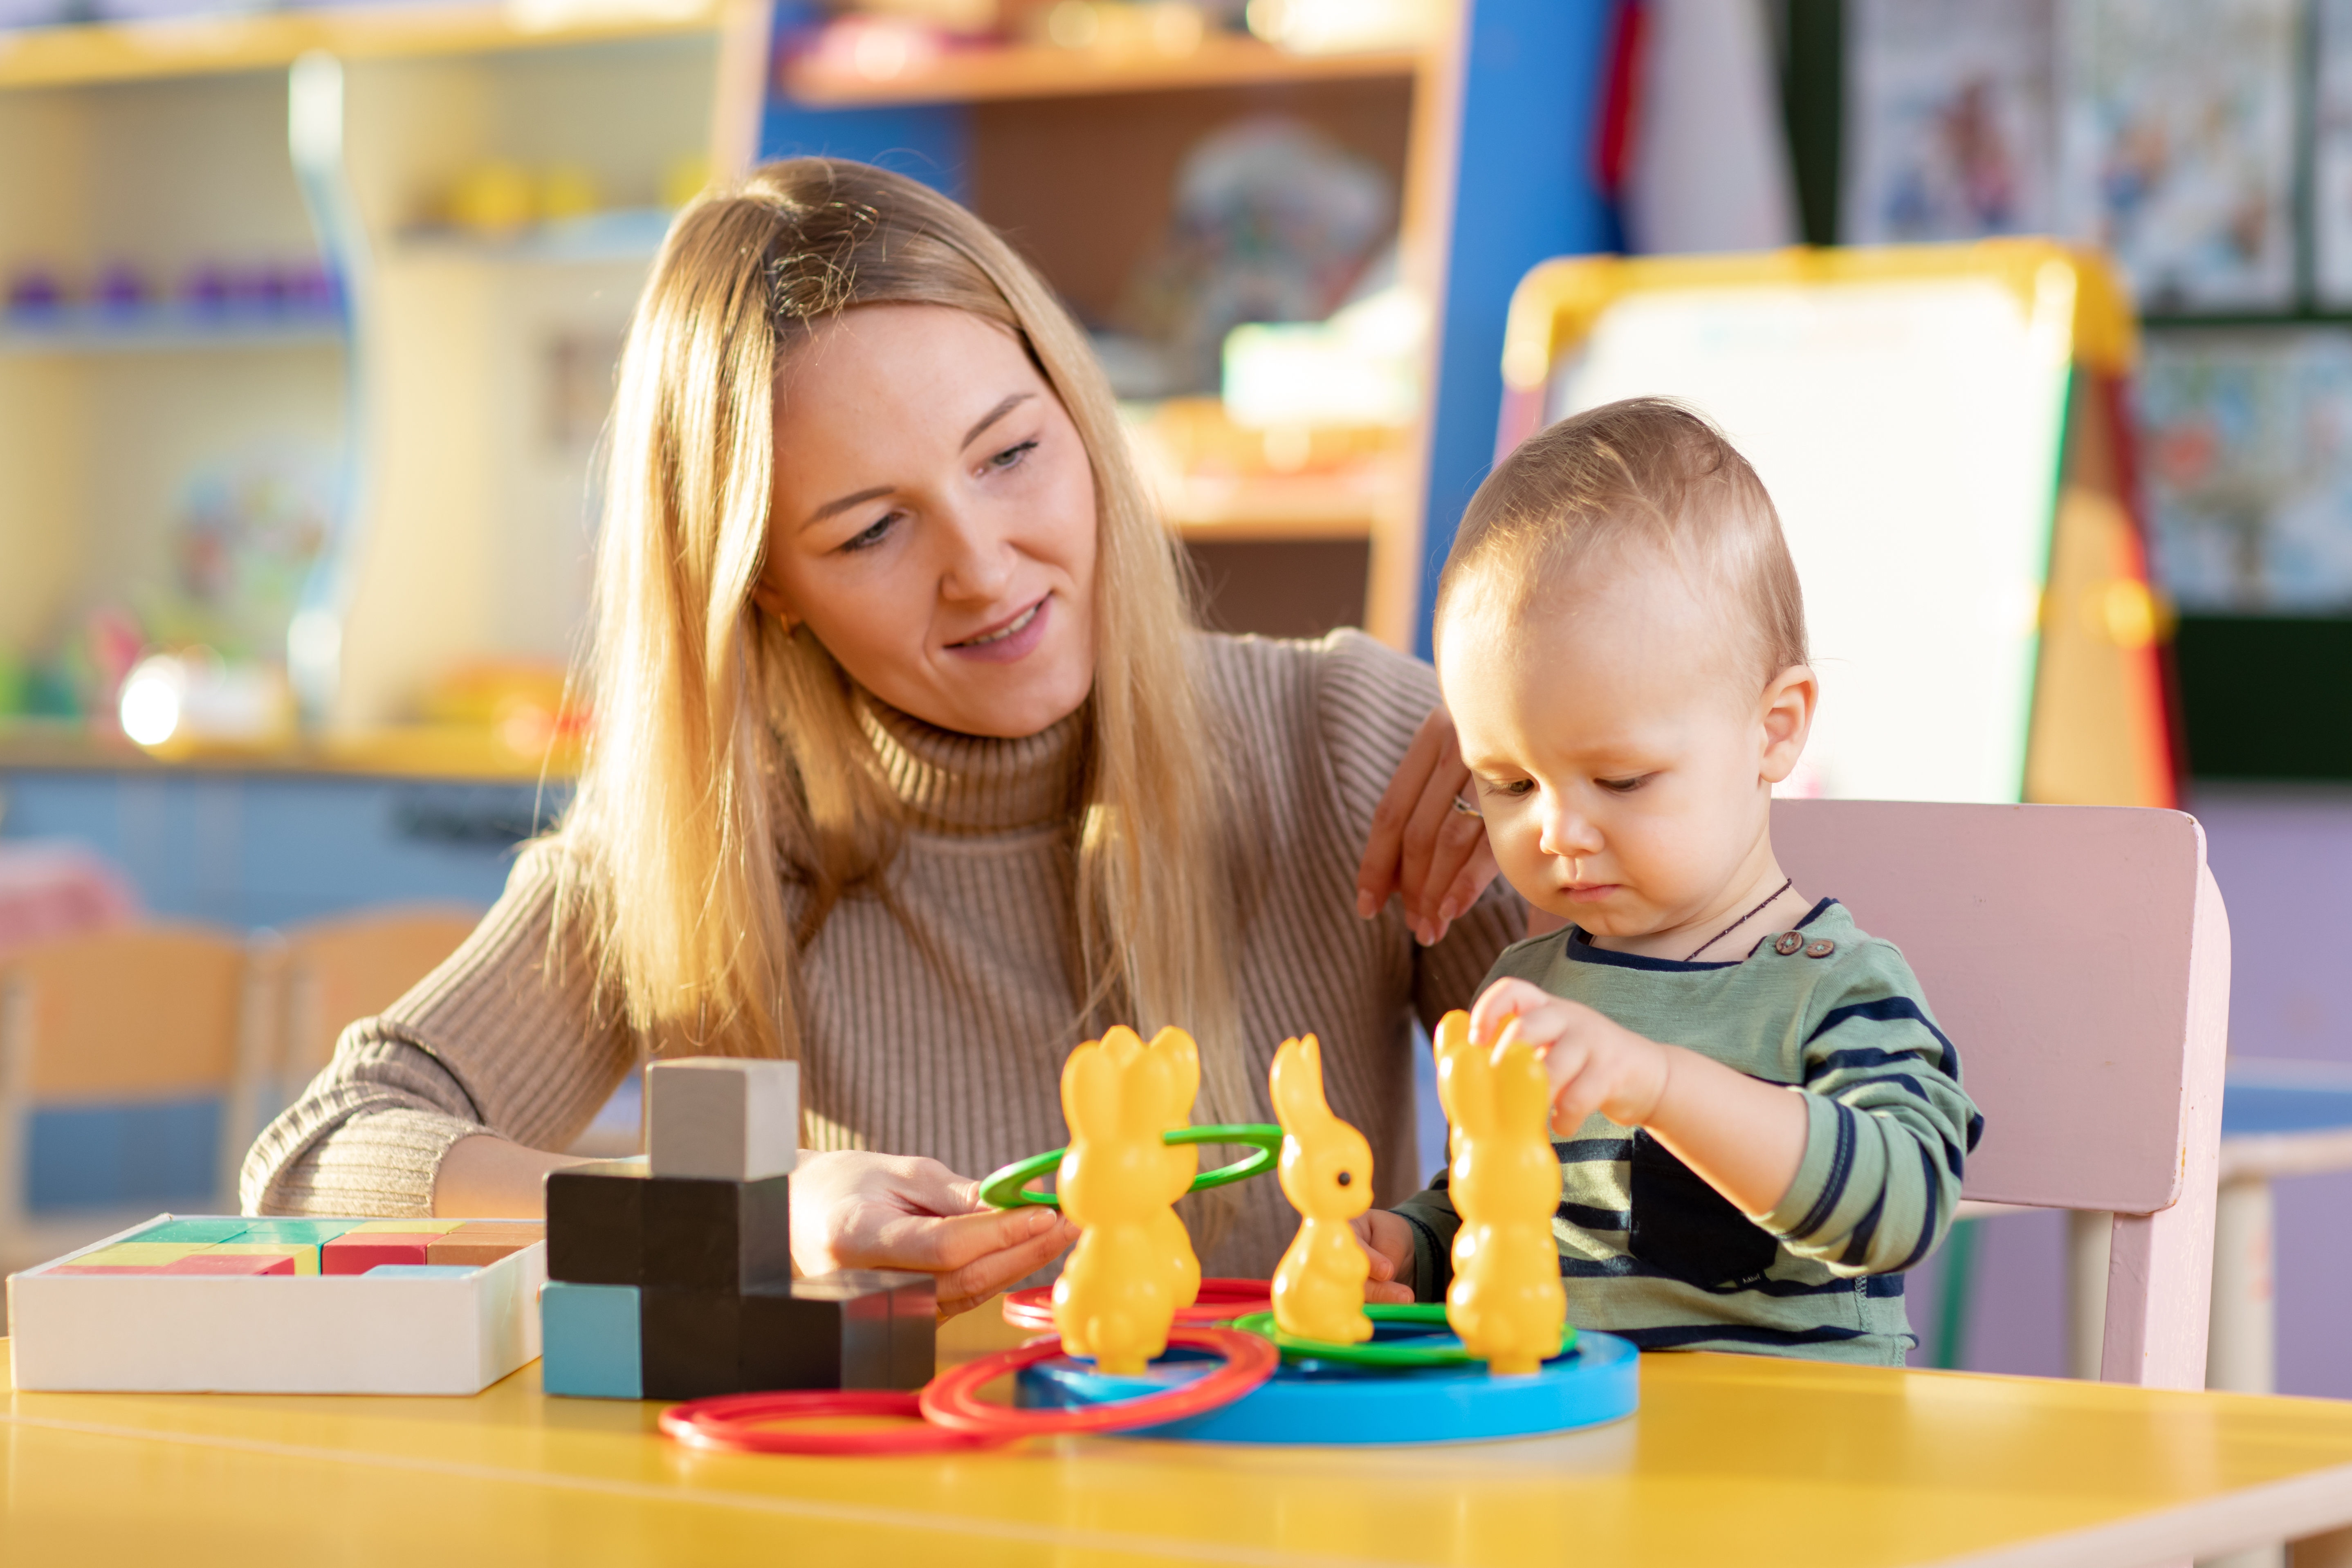 Early years teacher sits playing with younger learner